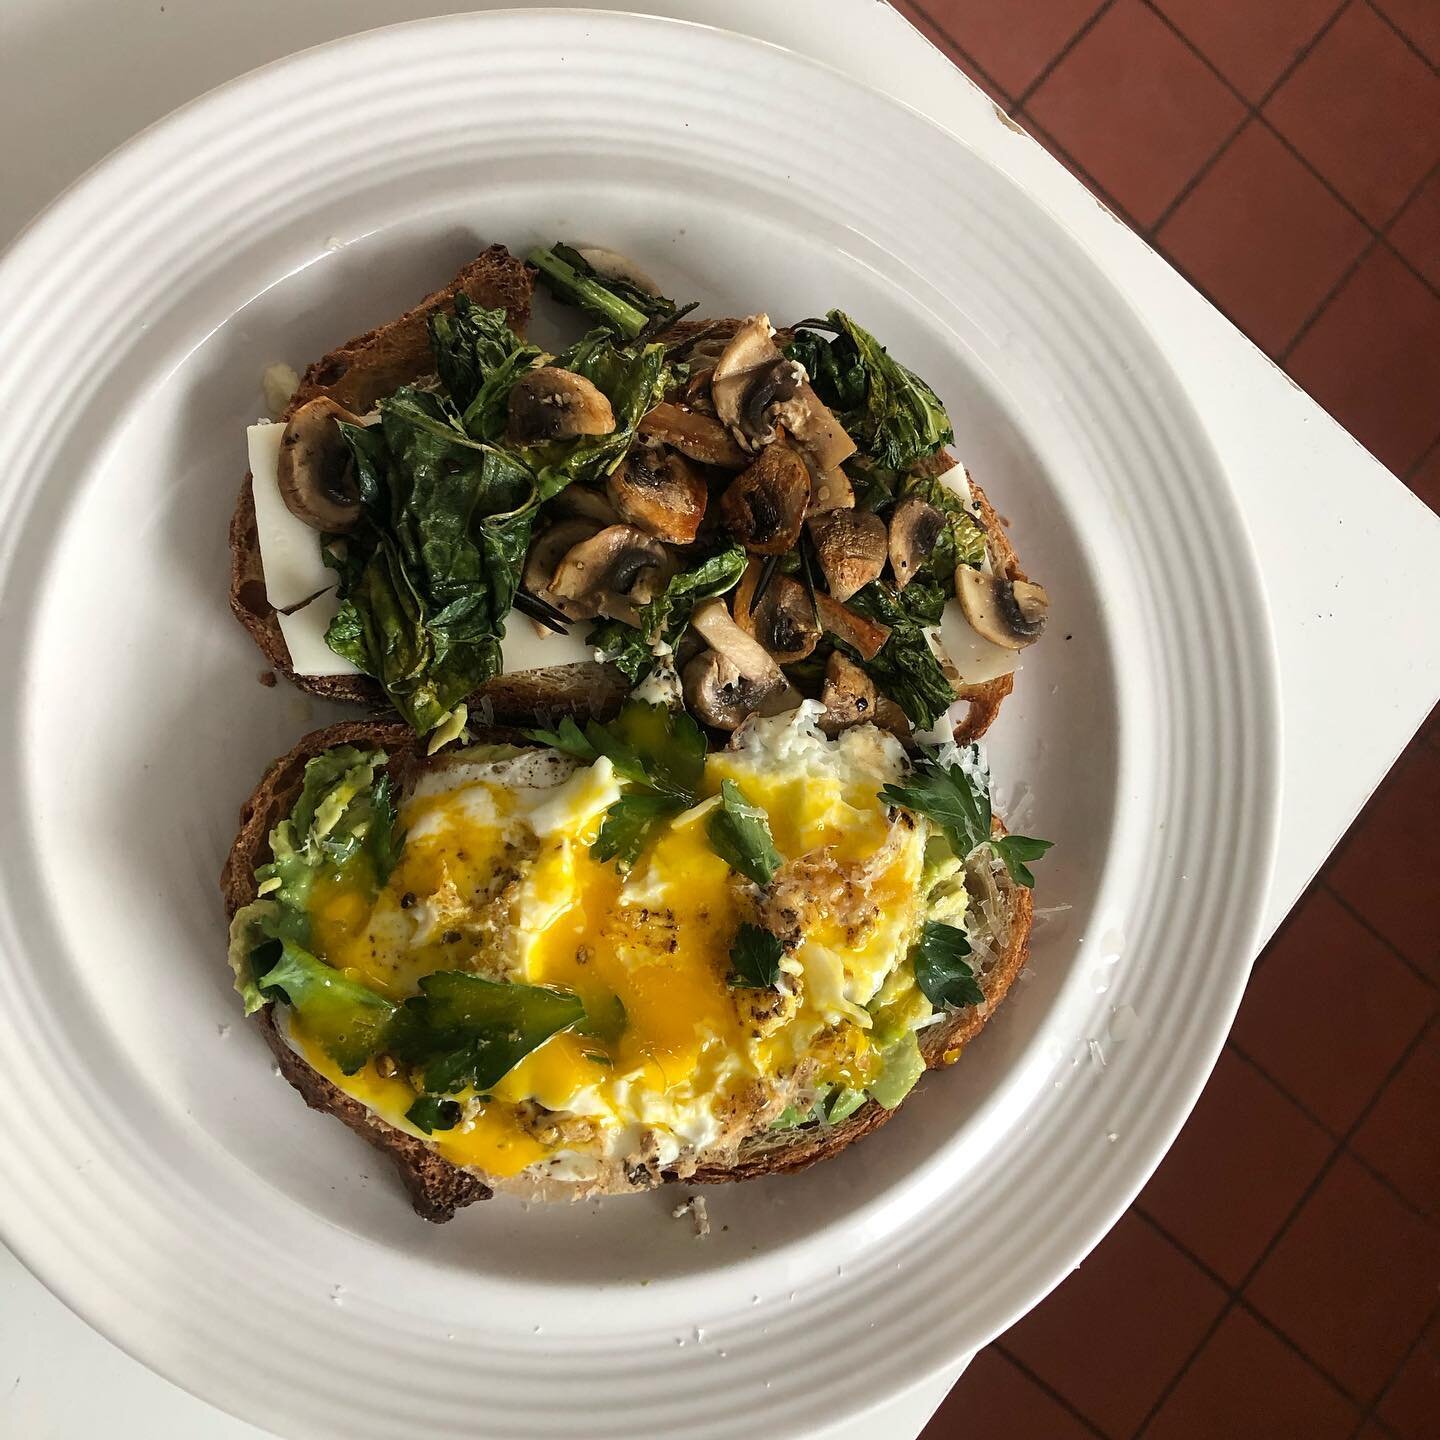 nothing beats toast baby! 
top one we gotta lil butter, lil goat gouda, lil pan-fried mushrooms &amp; kale &amp; rosemary
bottom guy we gotta lil avocado, lil fried eggy guy, lil parsley &amp; lil toucha pecorino romano fromage